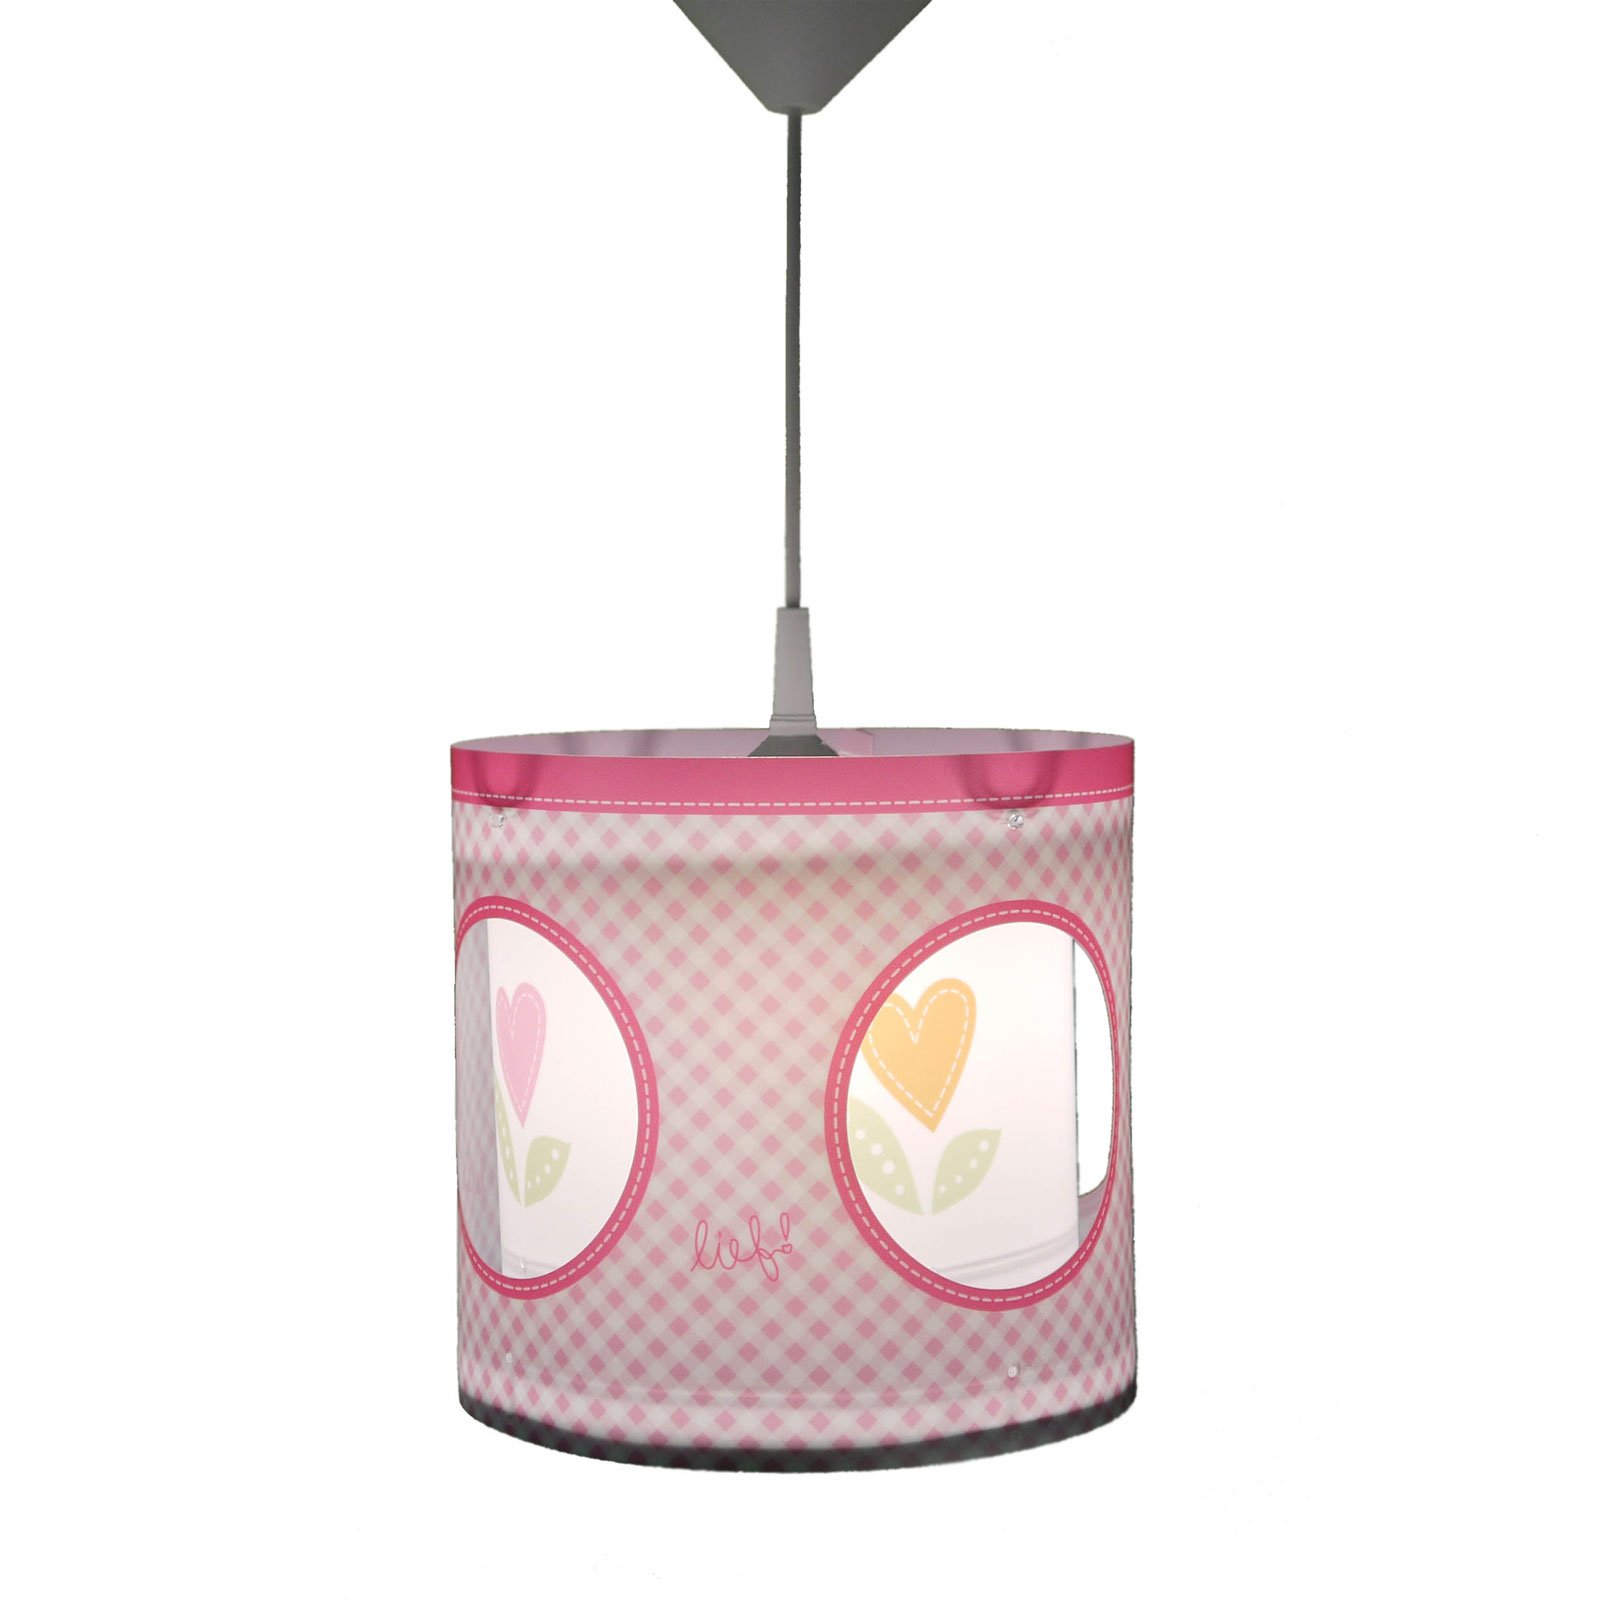 Lief for Girls rotating pendant light in pink